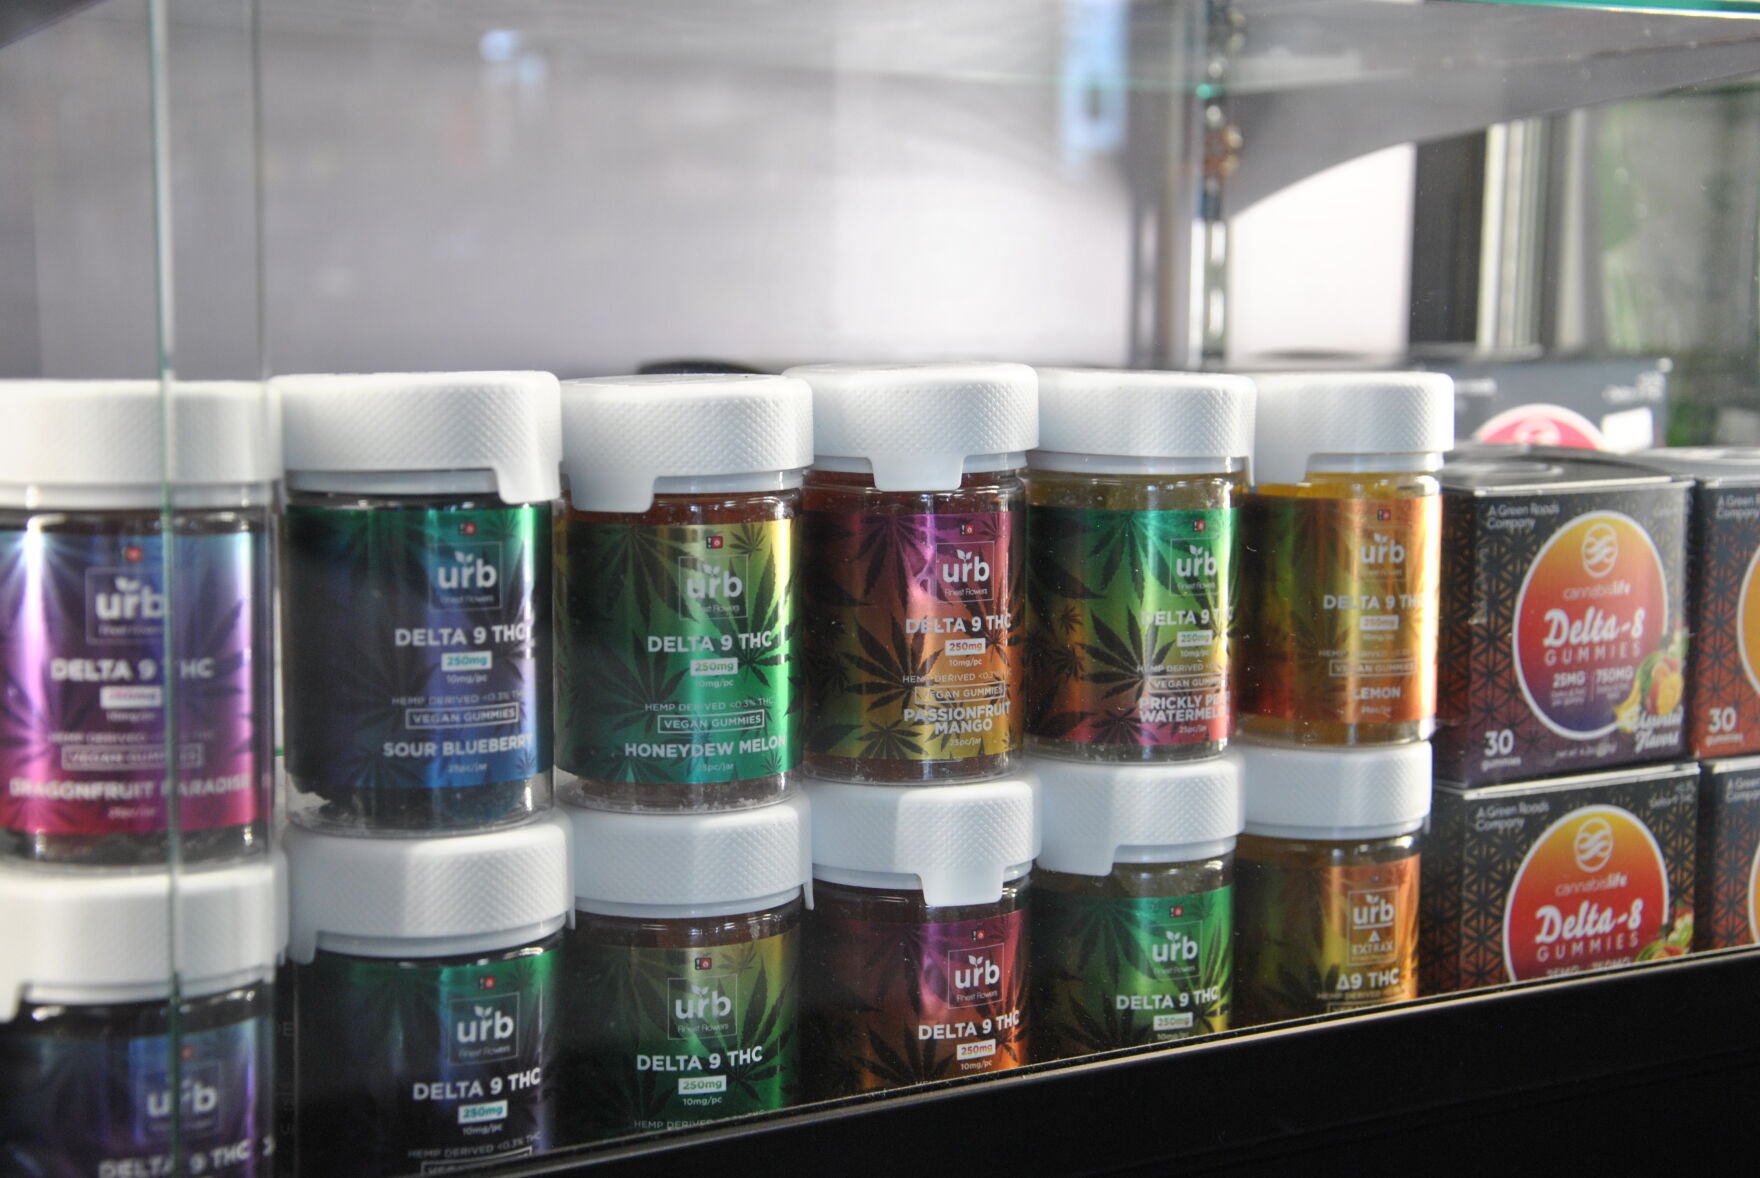 Thc Infused Products Could Get Drivers In Hot Water